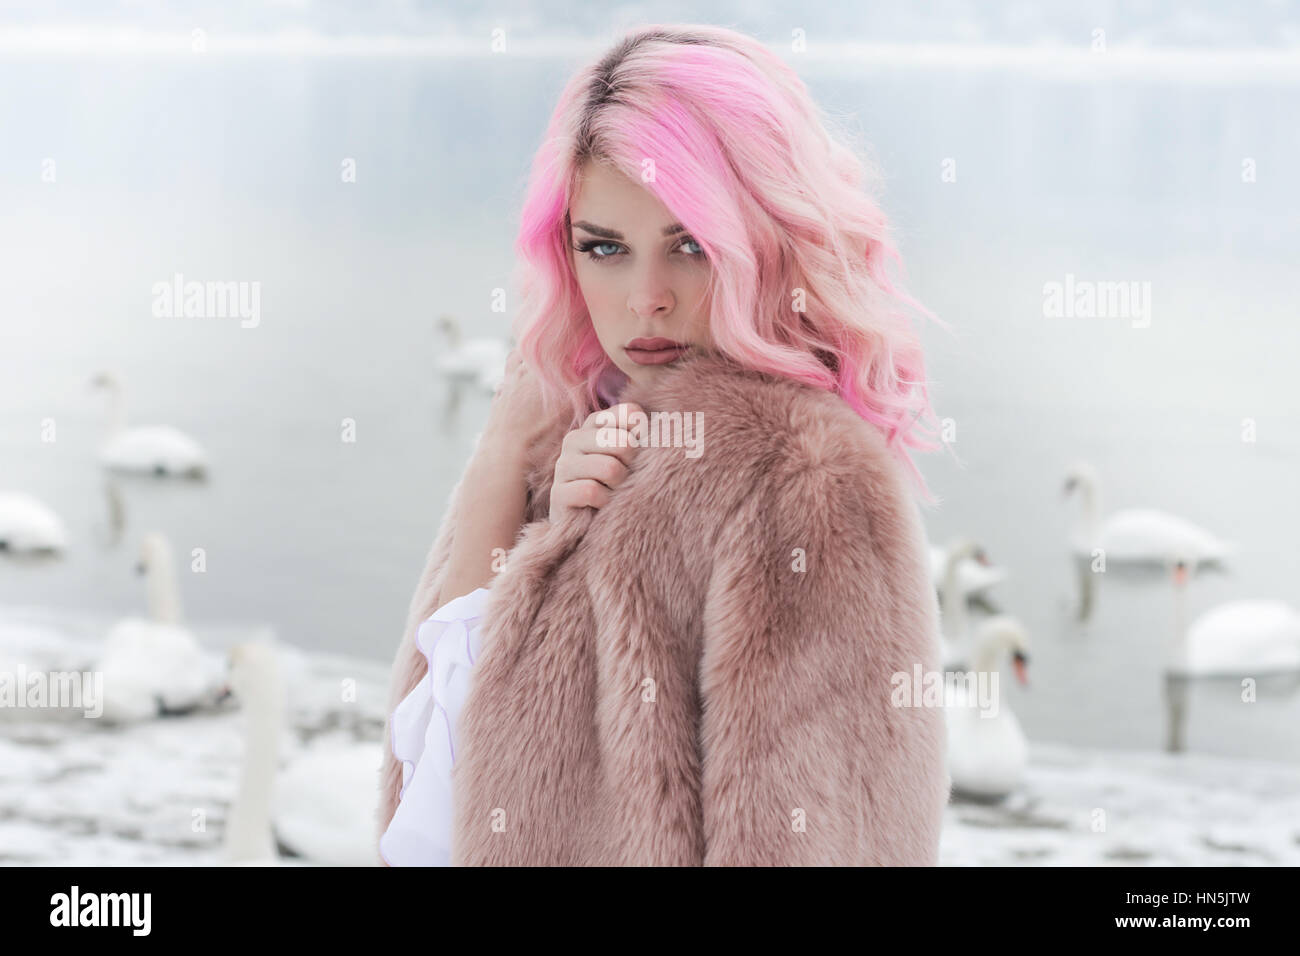 Beautiful girl with pink hair. Morning's fog. Swans on the river. Stock Photo